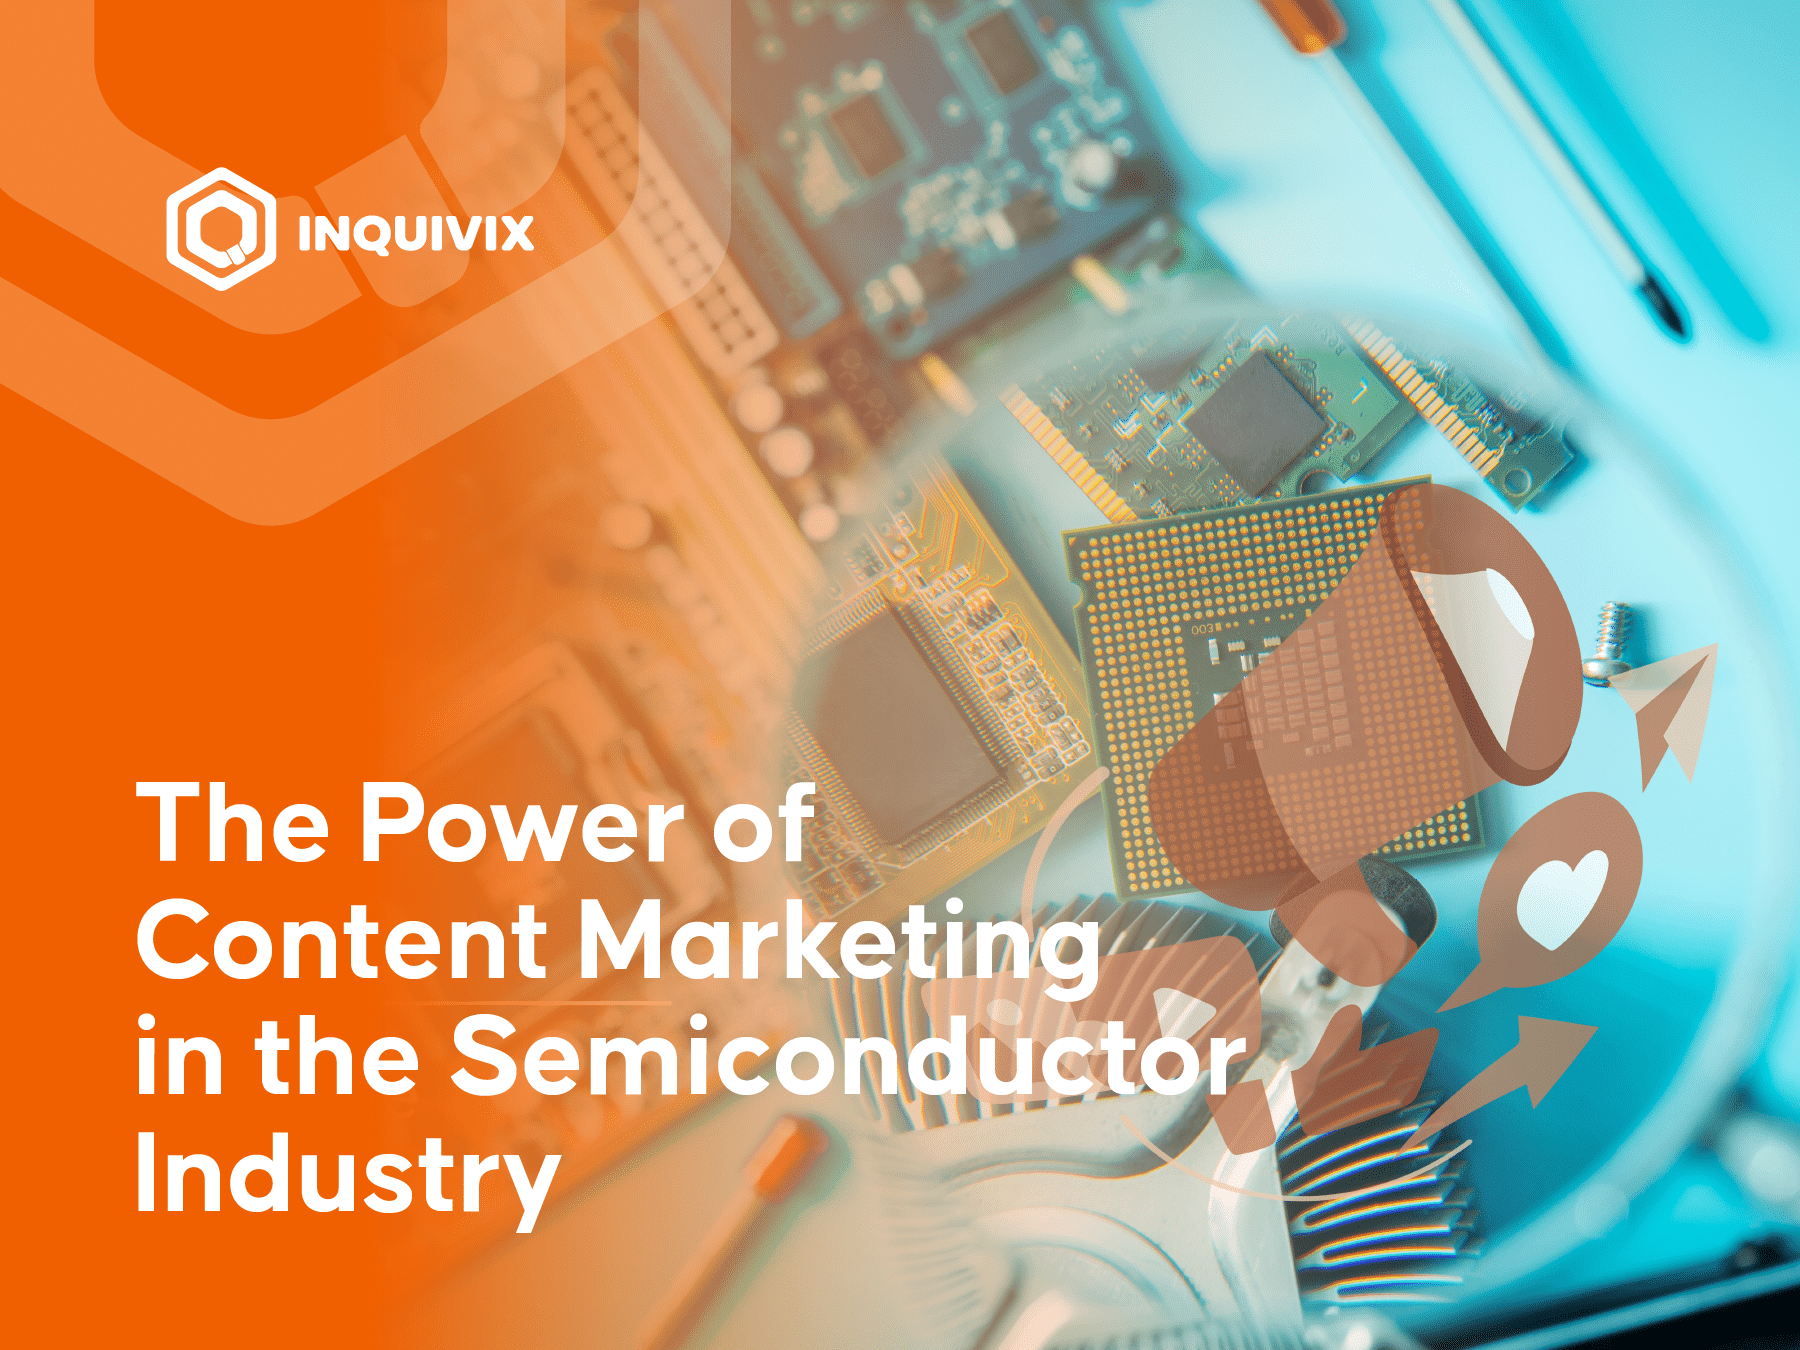 The Power of Content Marketing in the Semiconductor Industry